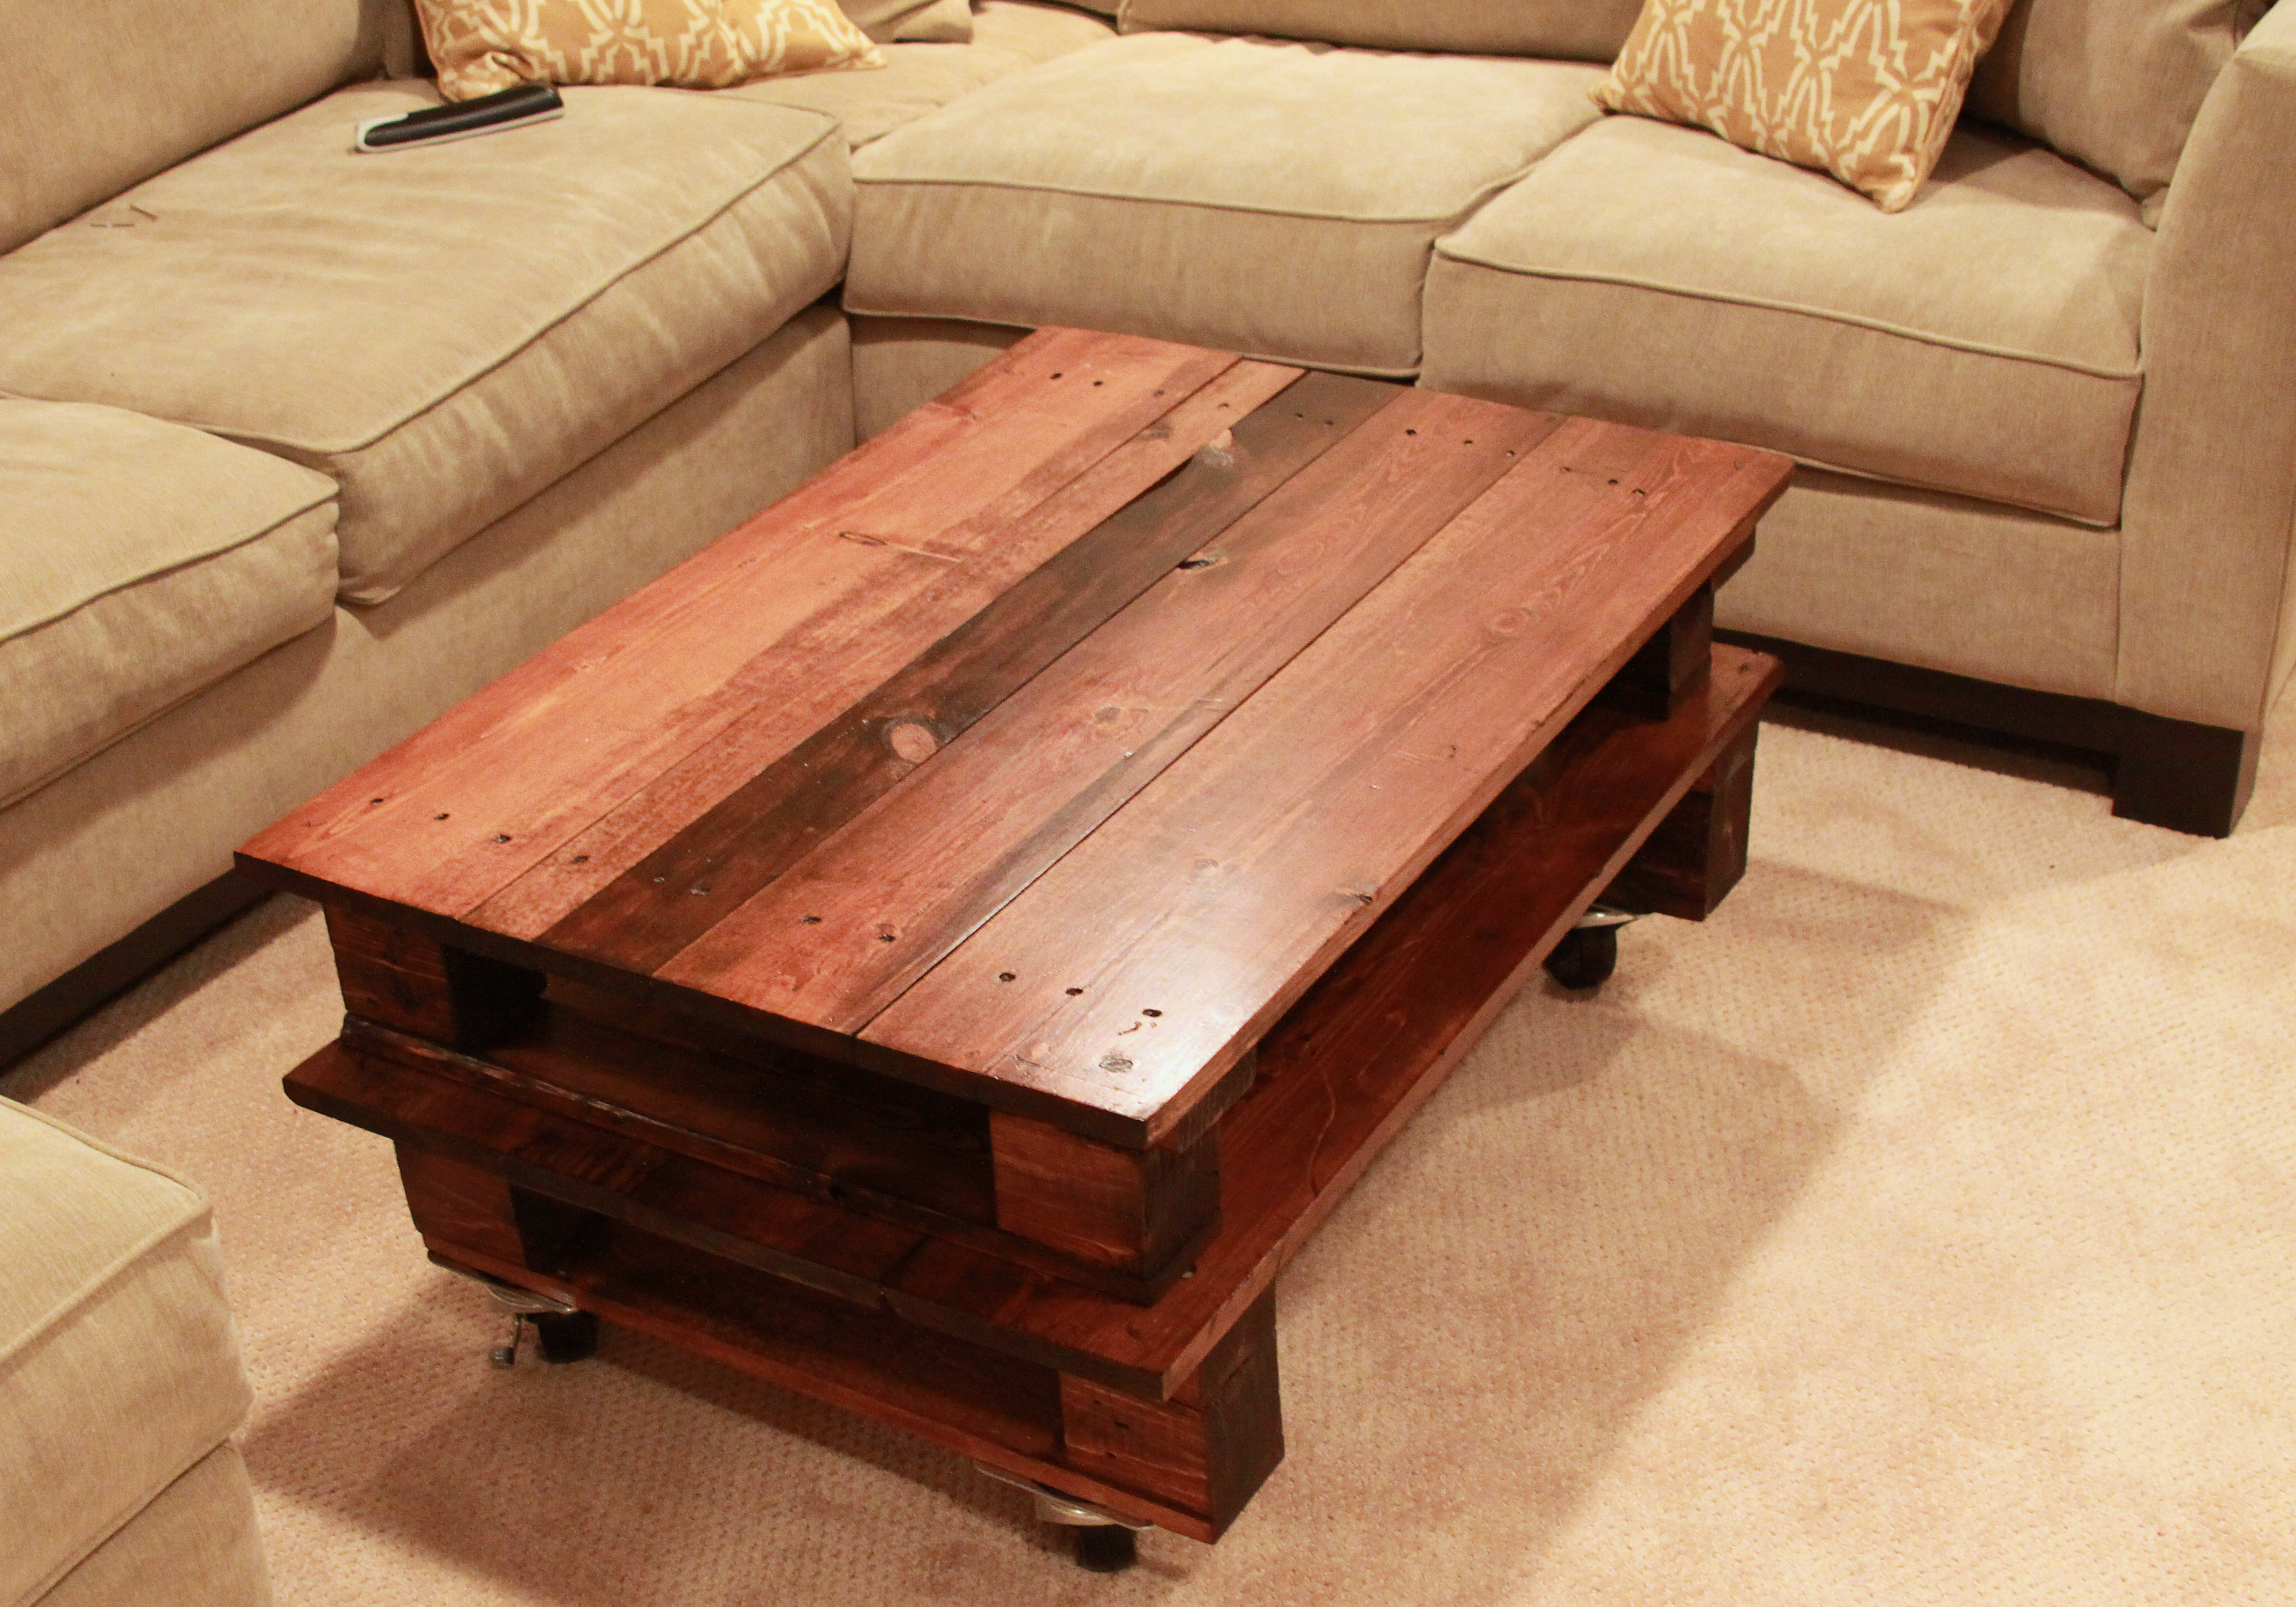 How to make a coffee table out of pallets